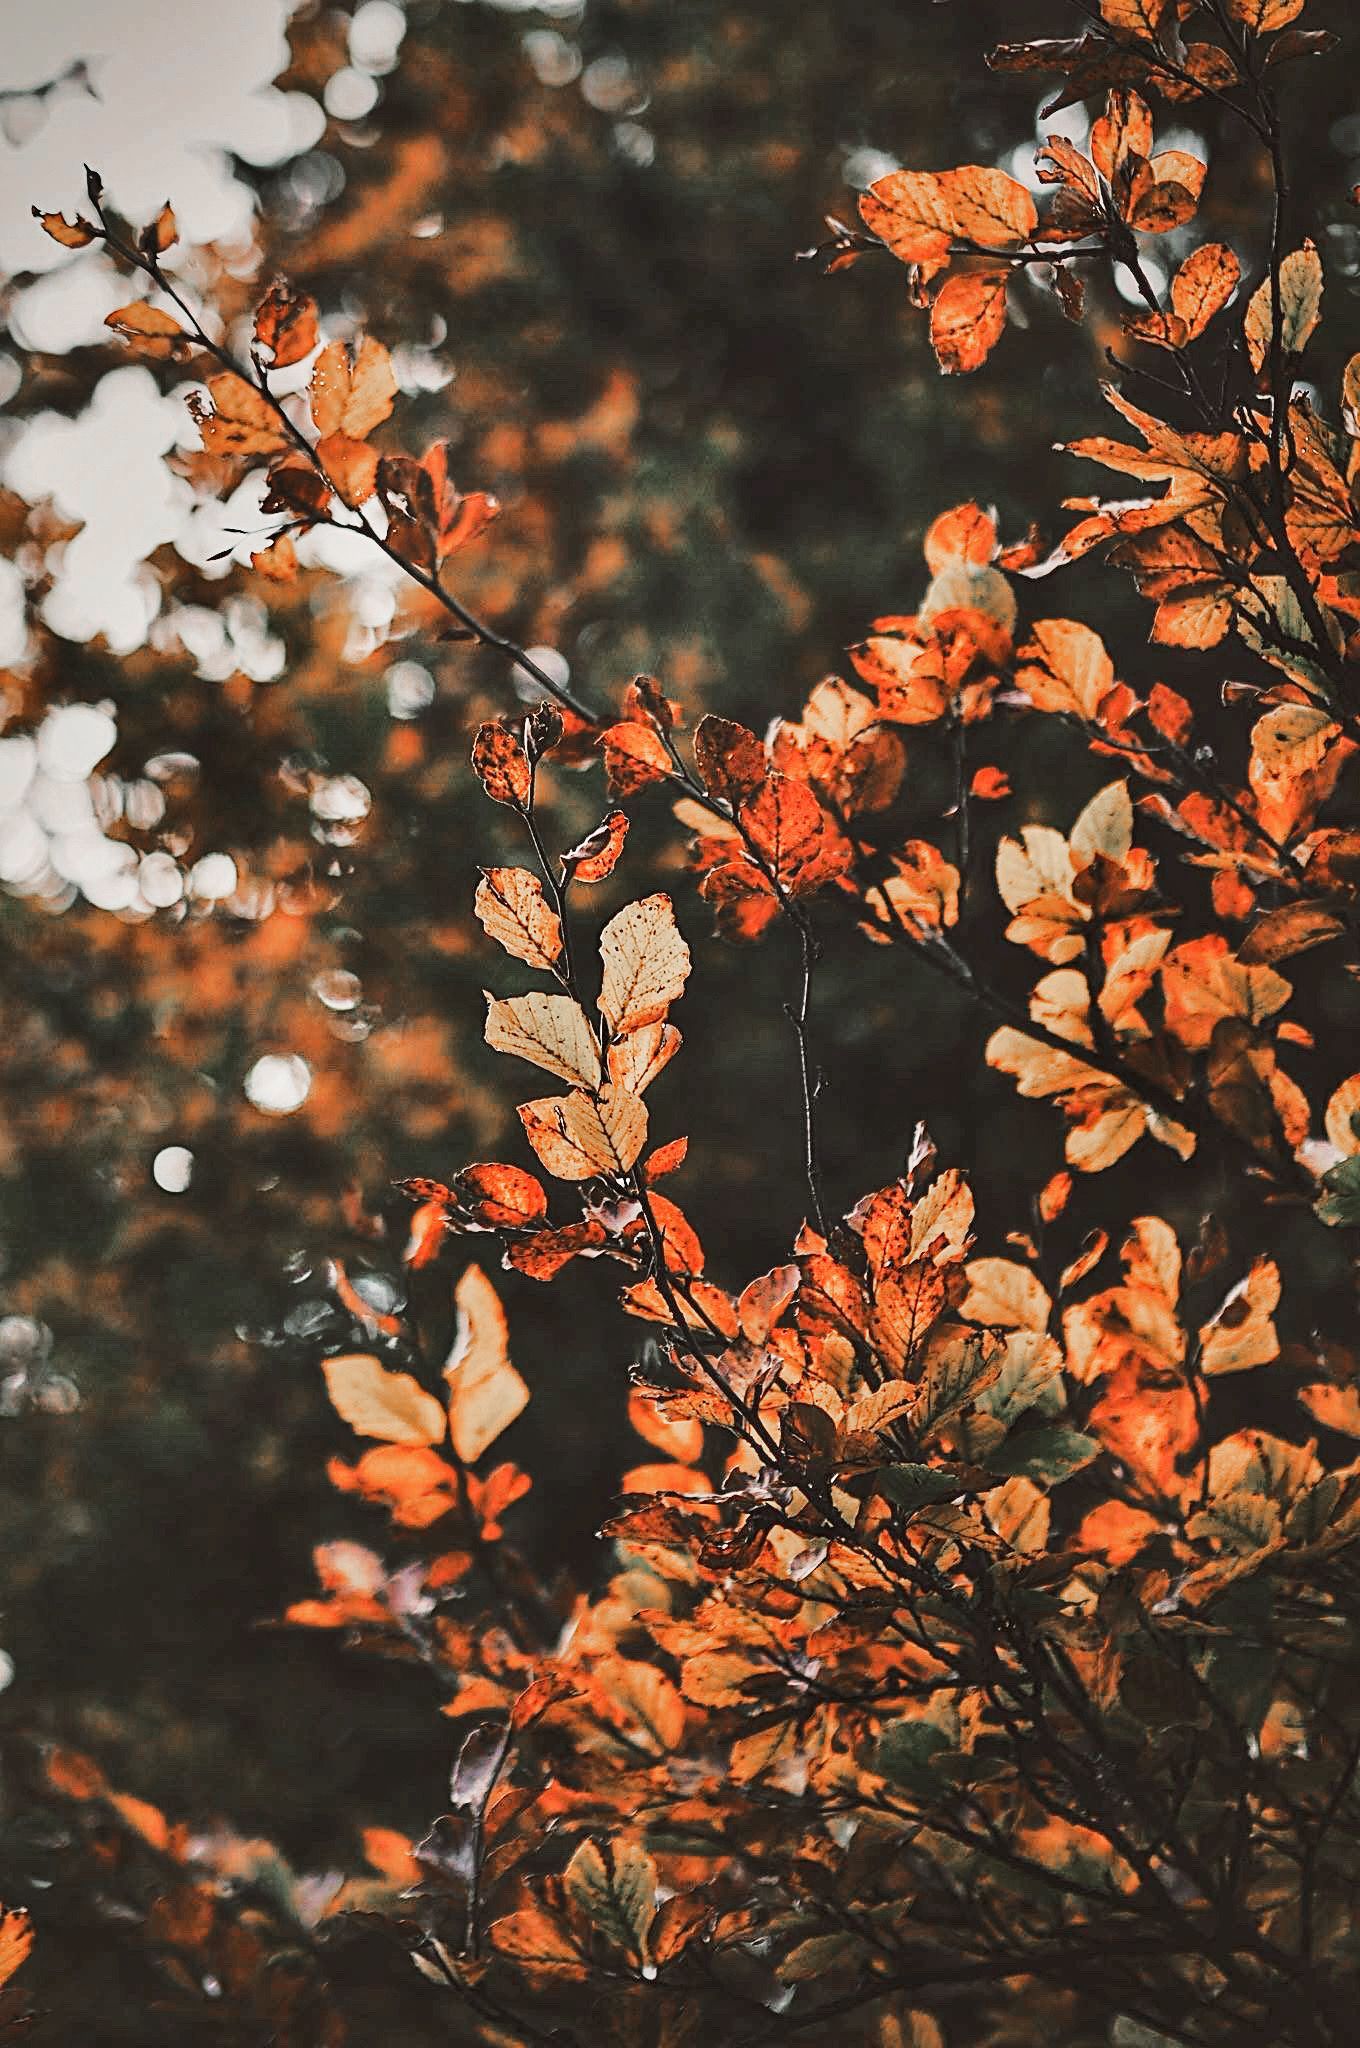 A tree branch with orange leaves in the fall. - Warm, fall